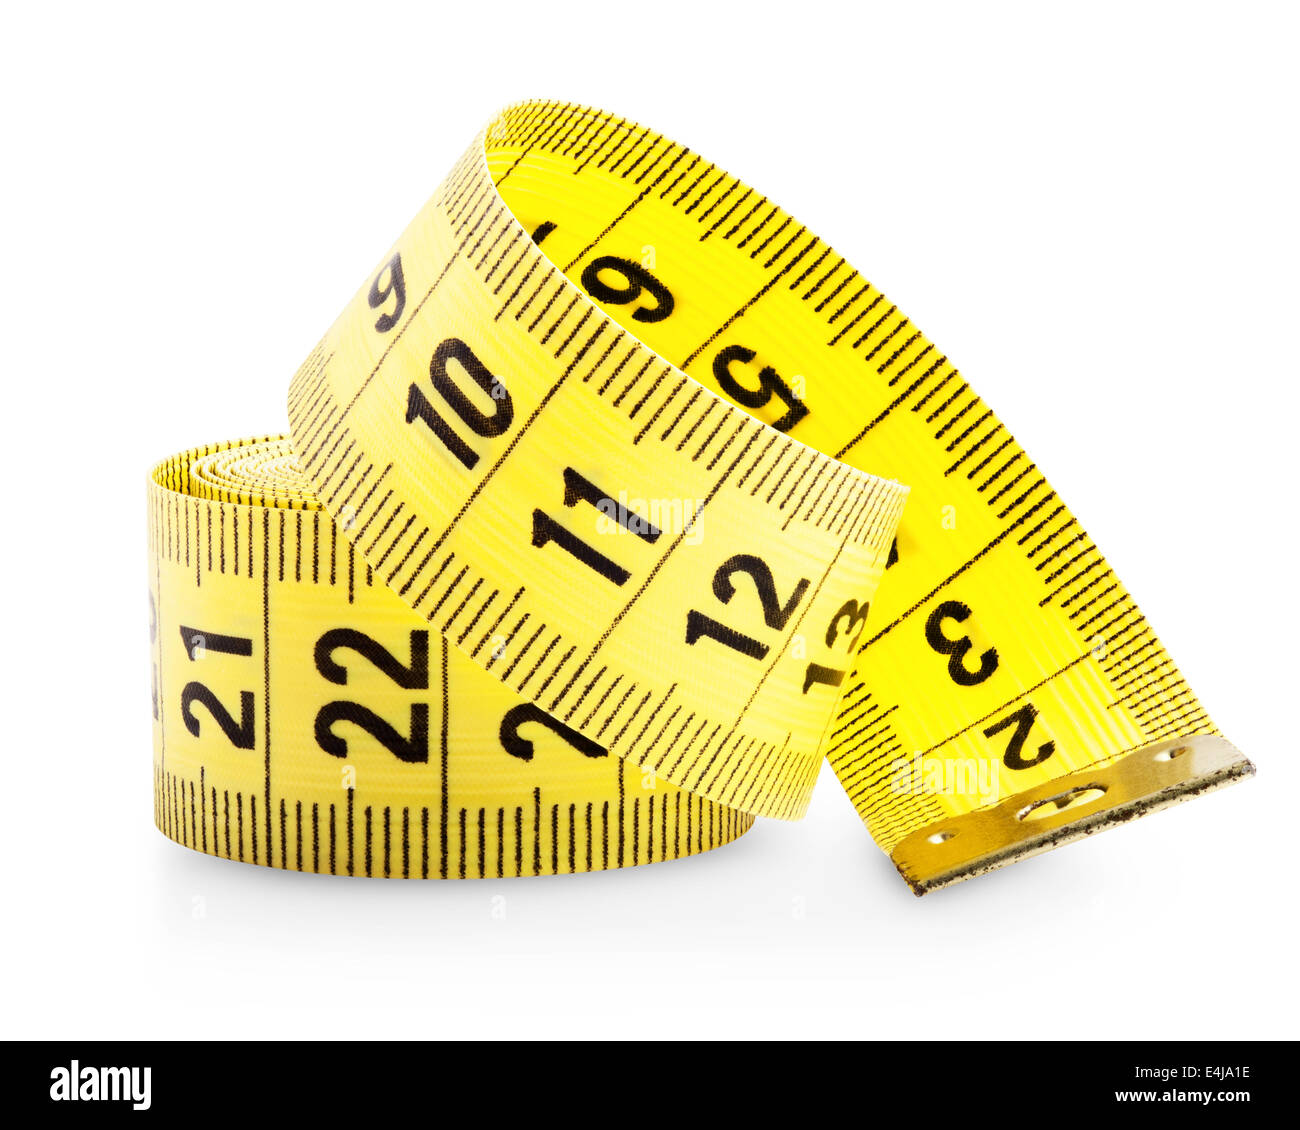 Measuring Tape stock photo. Image of health, clothing, coiled - 696932